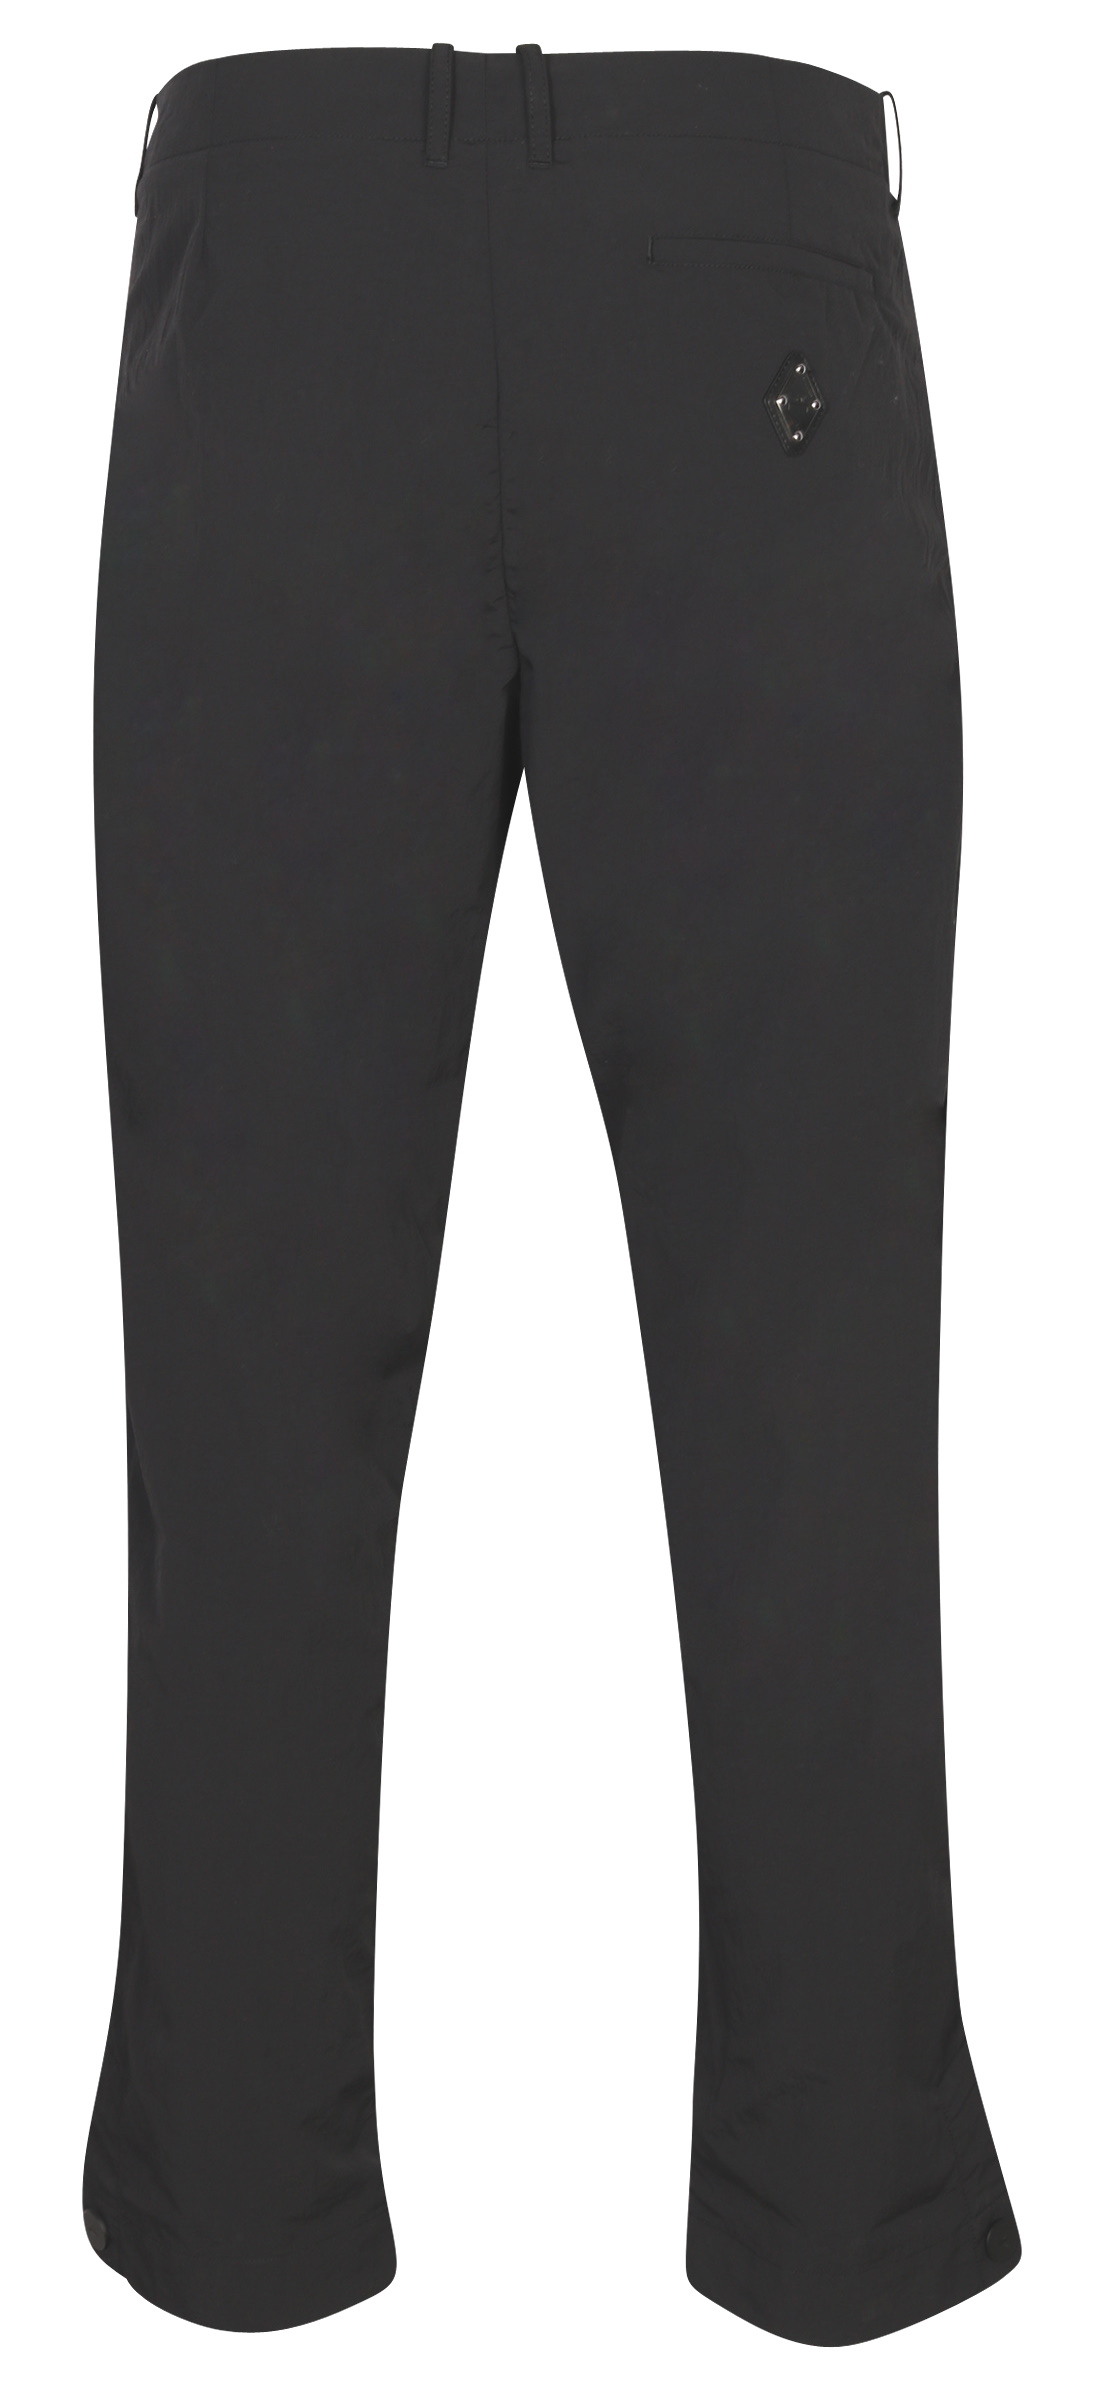 A-Cold-Wall Tailored Nylon Trouser Black